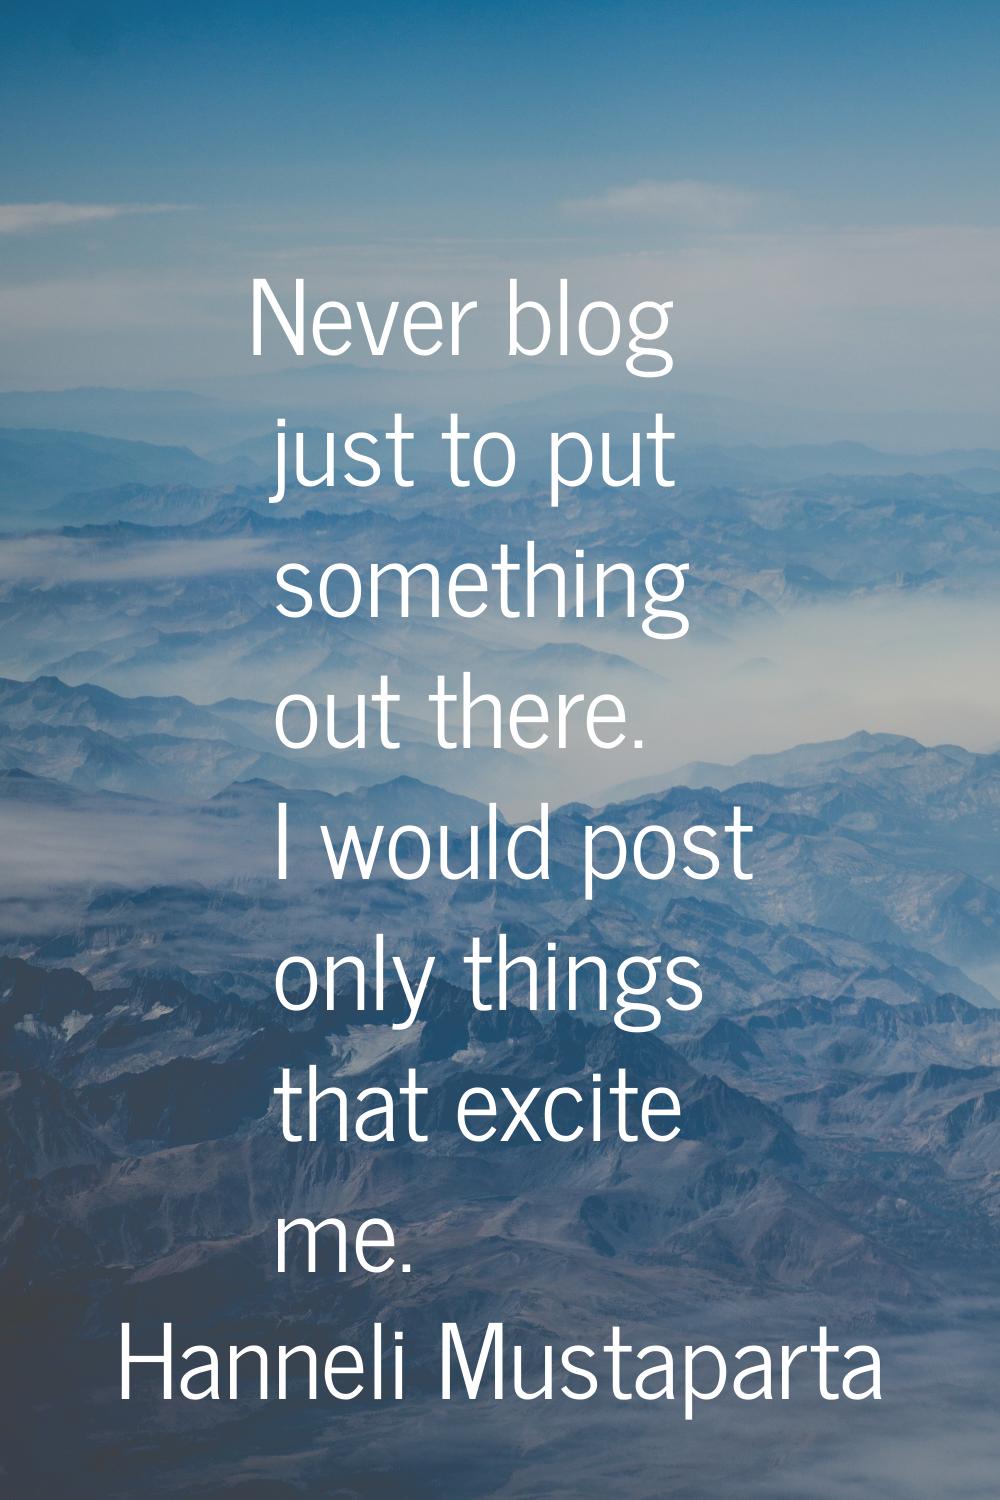 Never blog just to put something out there. I would post only things that excite me.